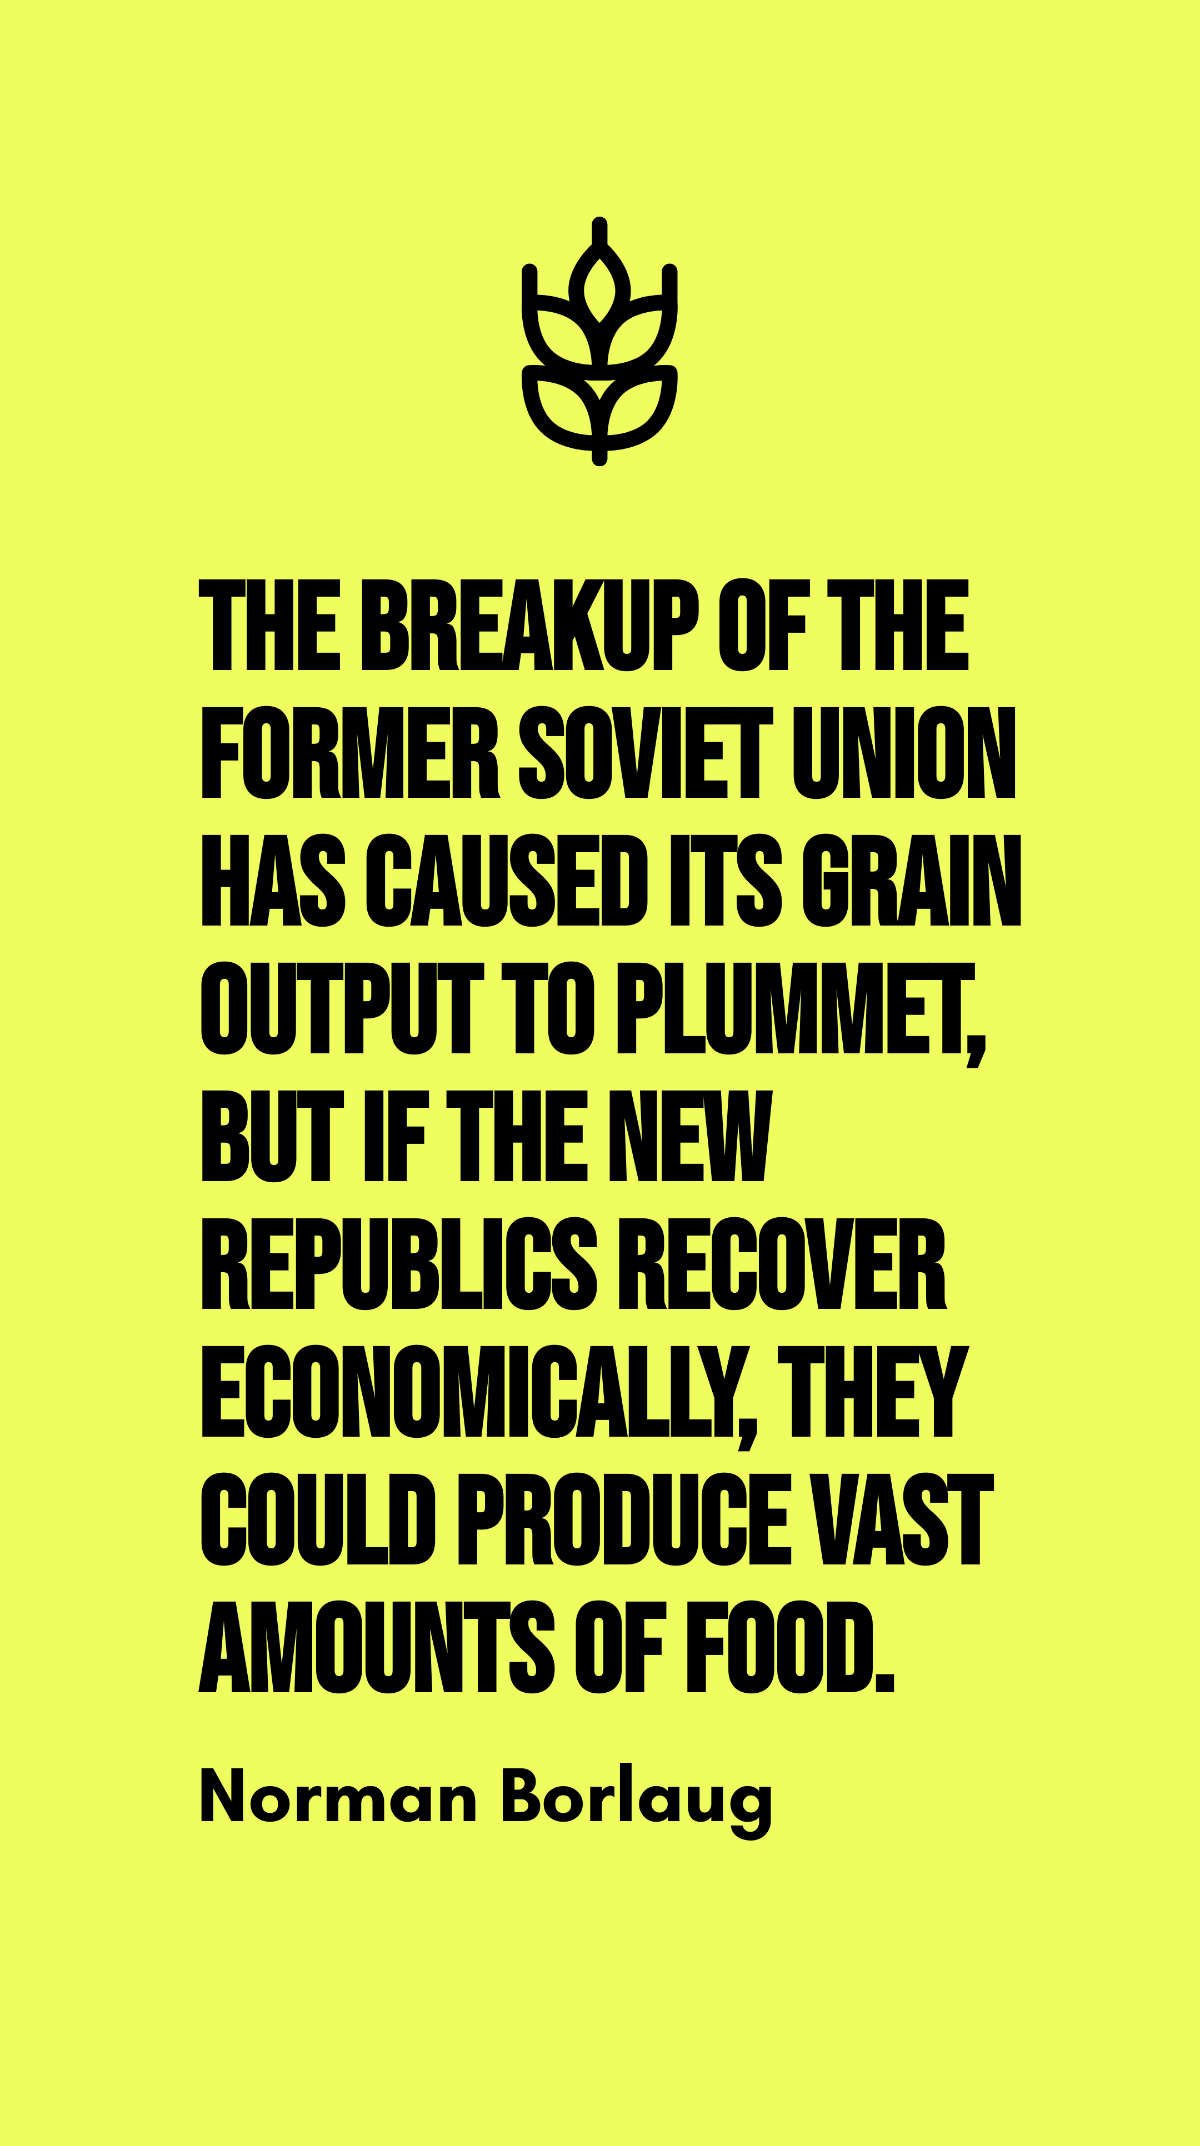 Free Norman Borlaug - The breakup of the former Soviet Union has caused its grain output to plummet, but if the new republics recover economically, they could produce vast amounts of food. Template